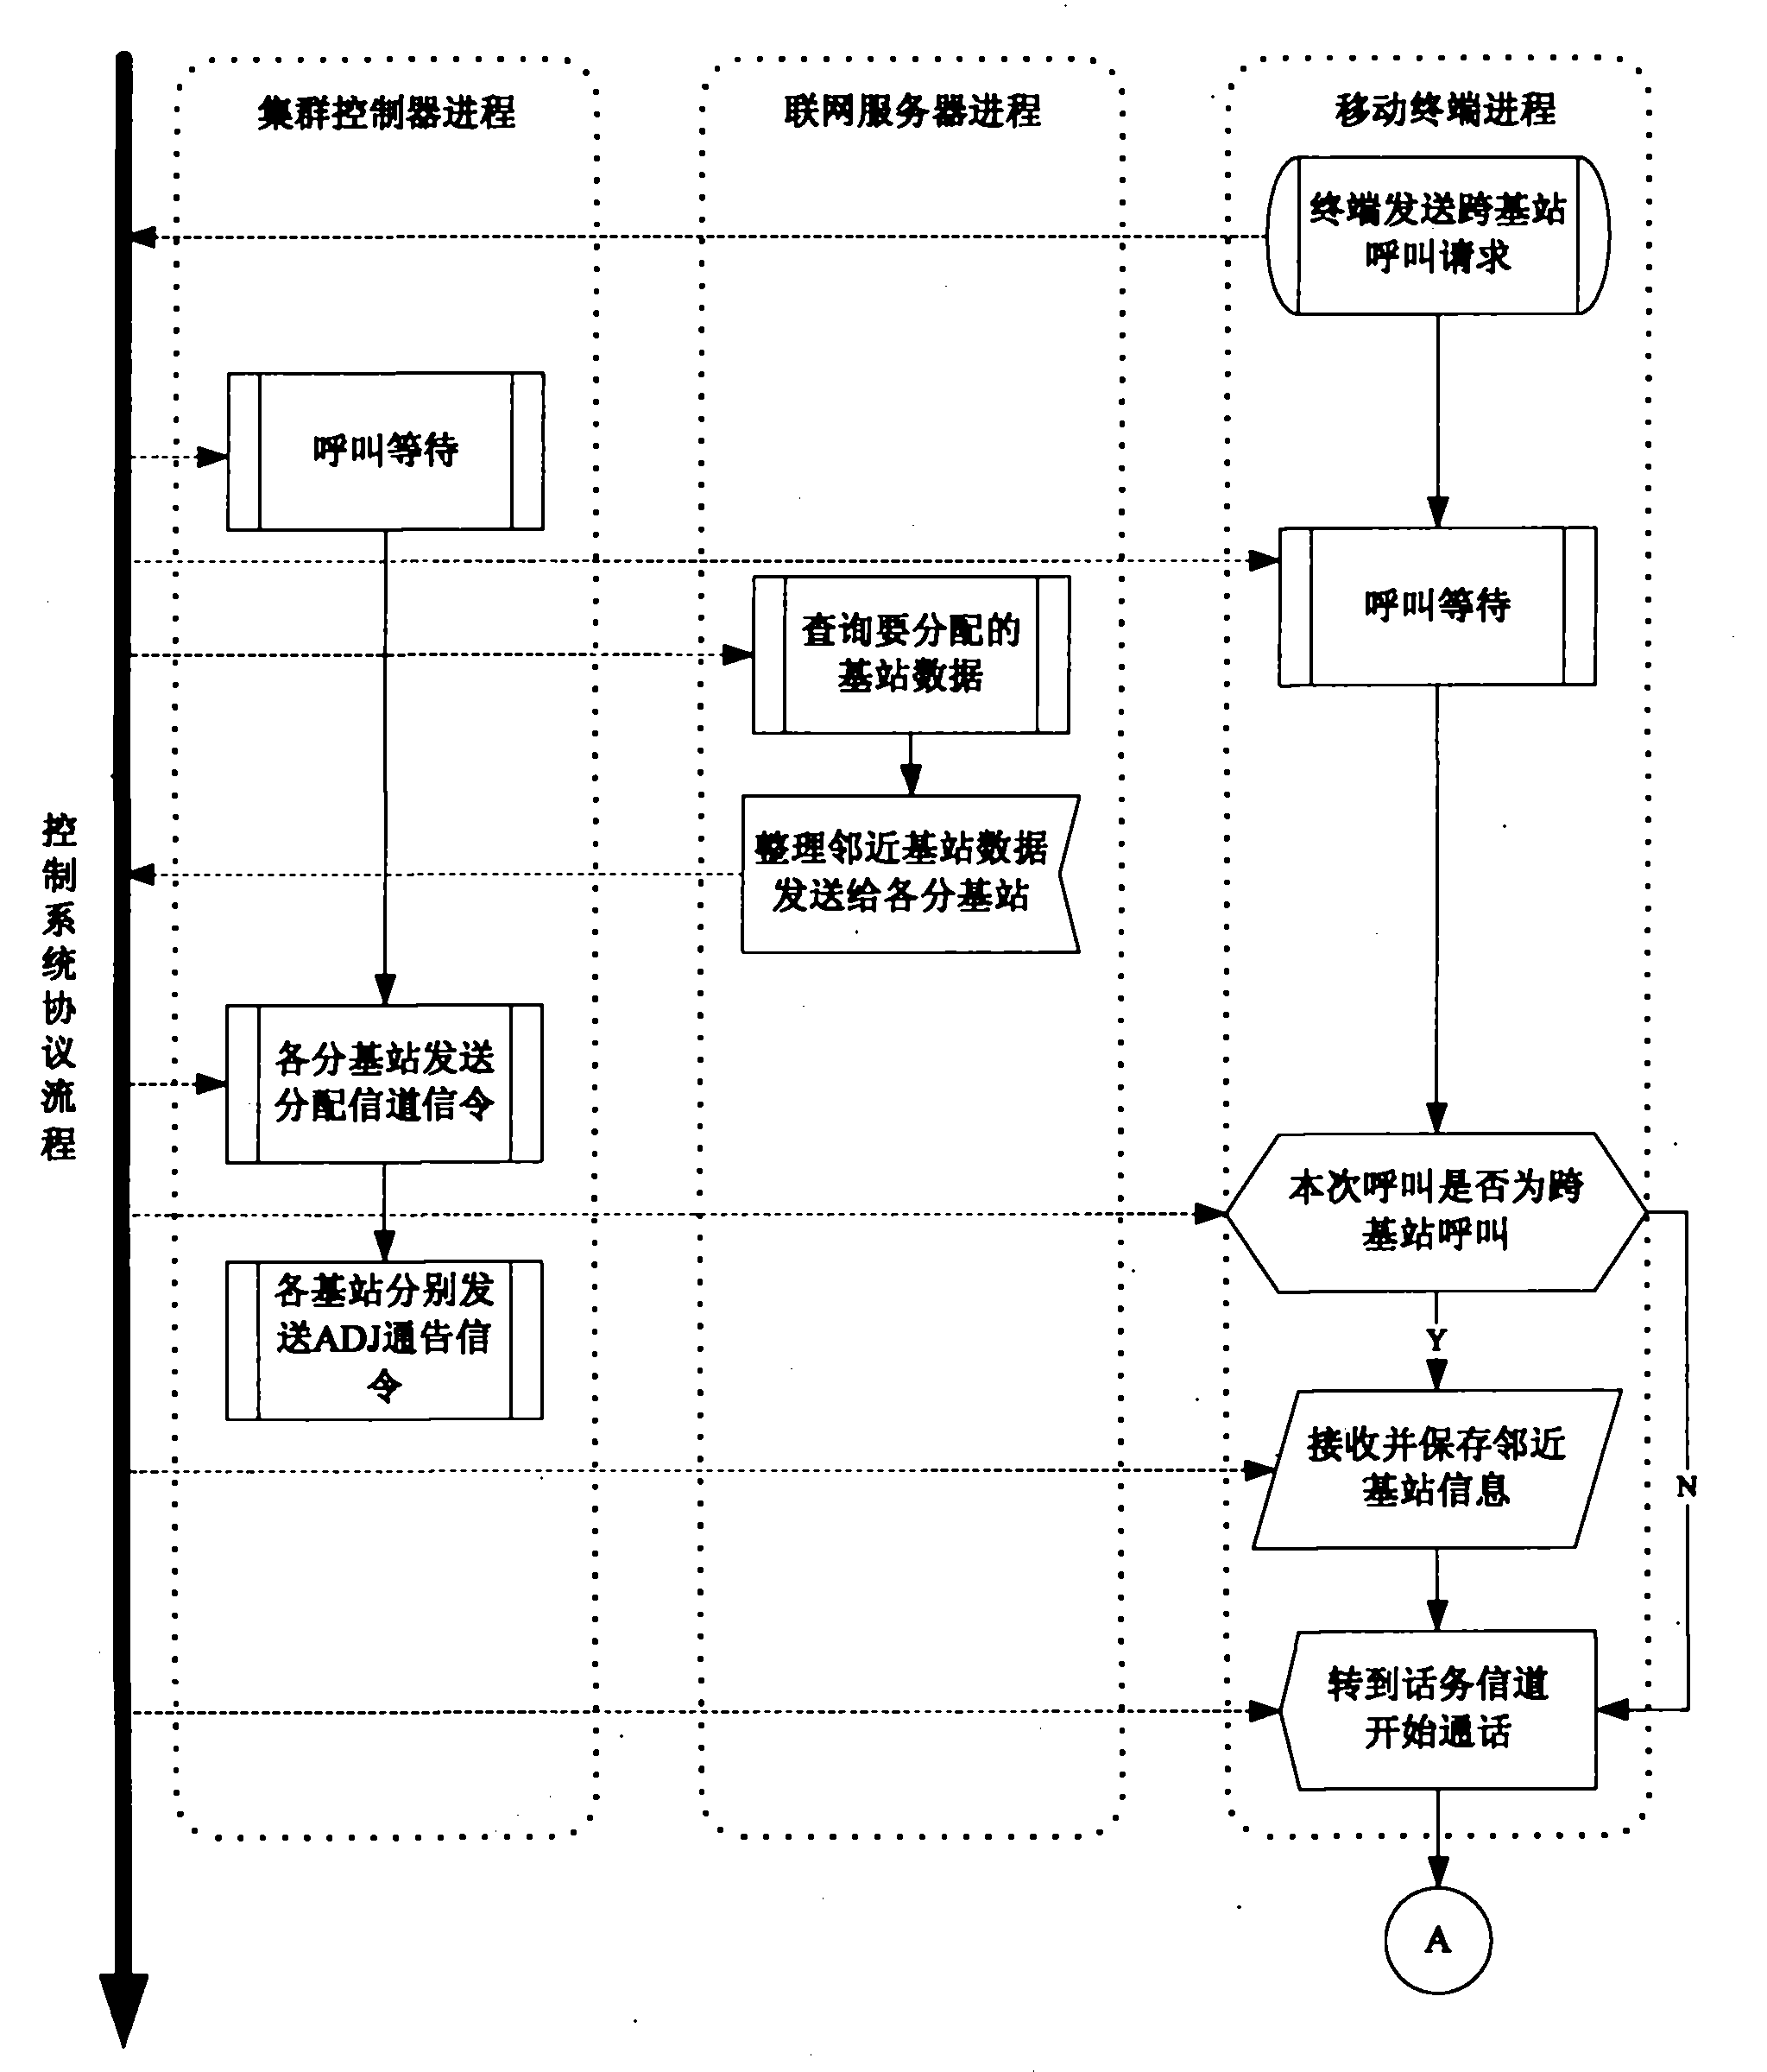 Method for implementing mobile terminal uninterrupted talking between base stations in cluster system